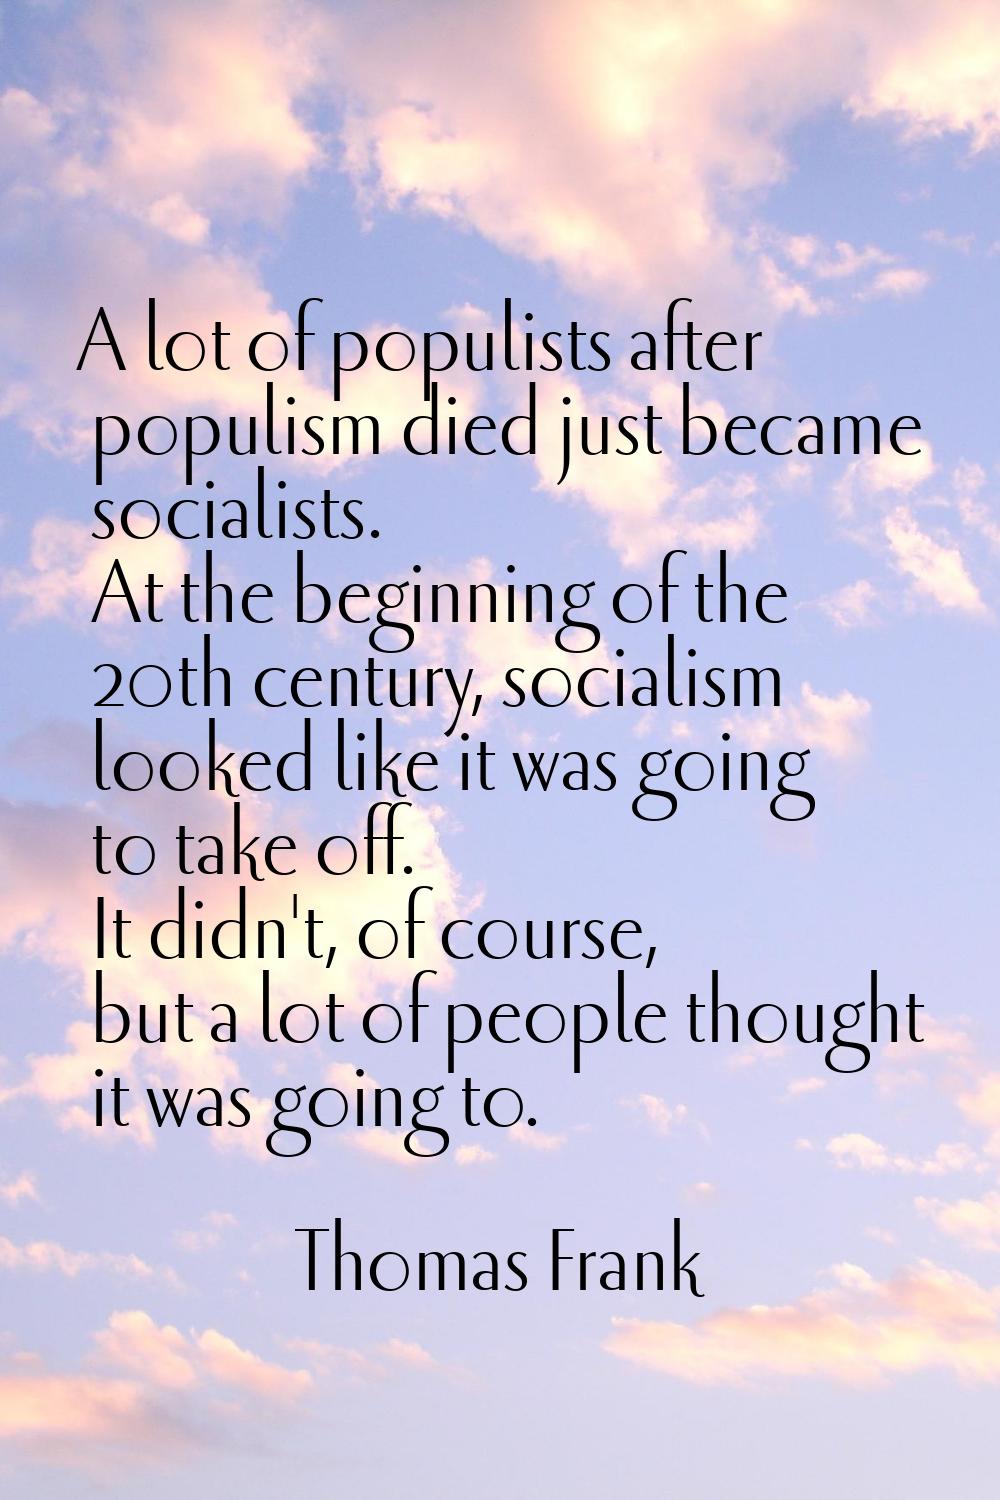 A lot of populists after populism died just became socialists. At the beginning of the 20th century